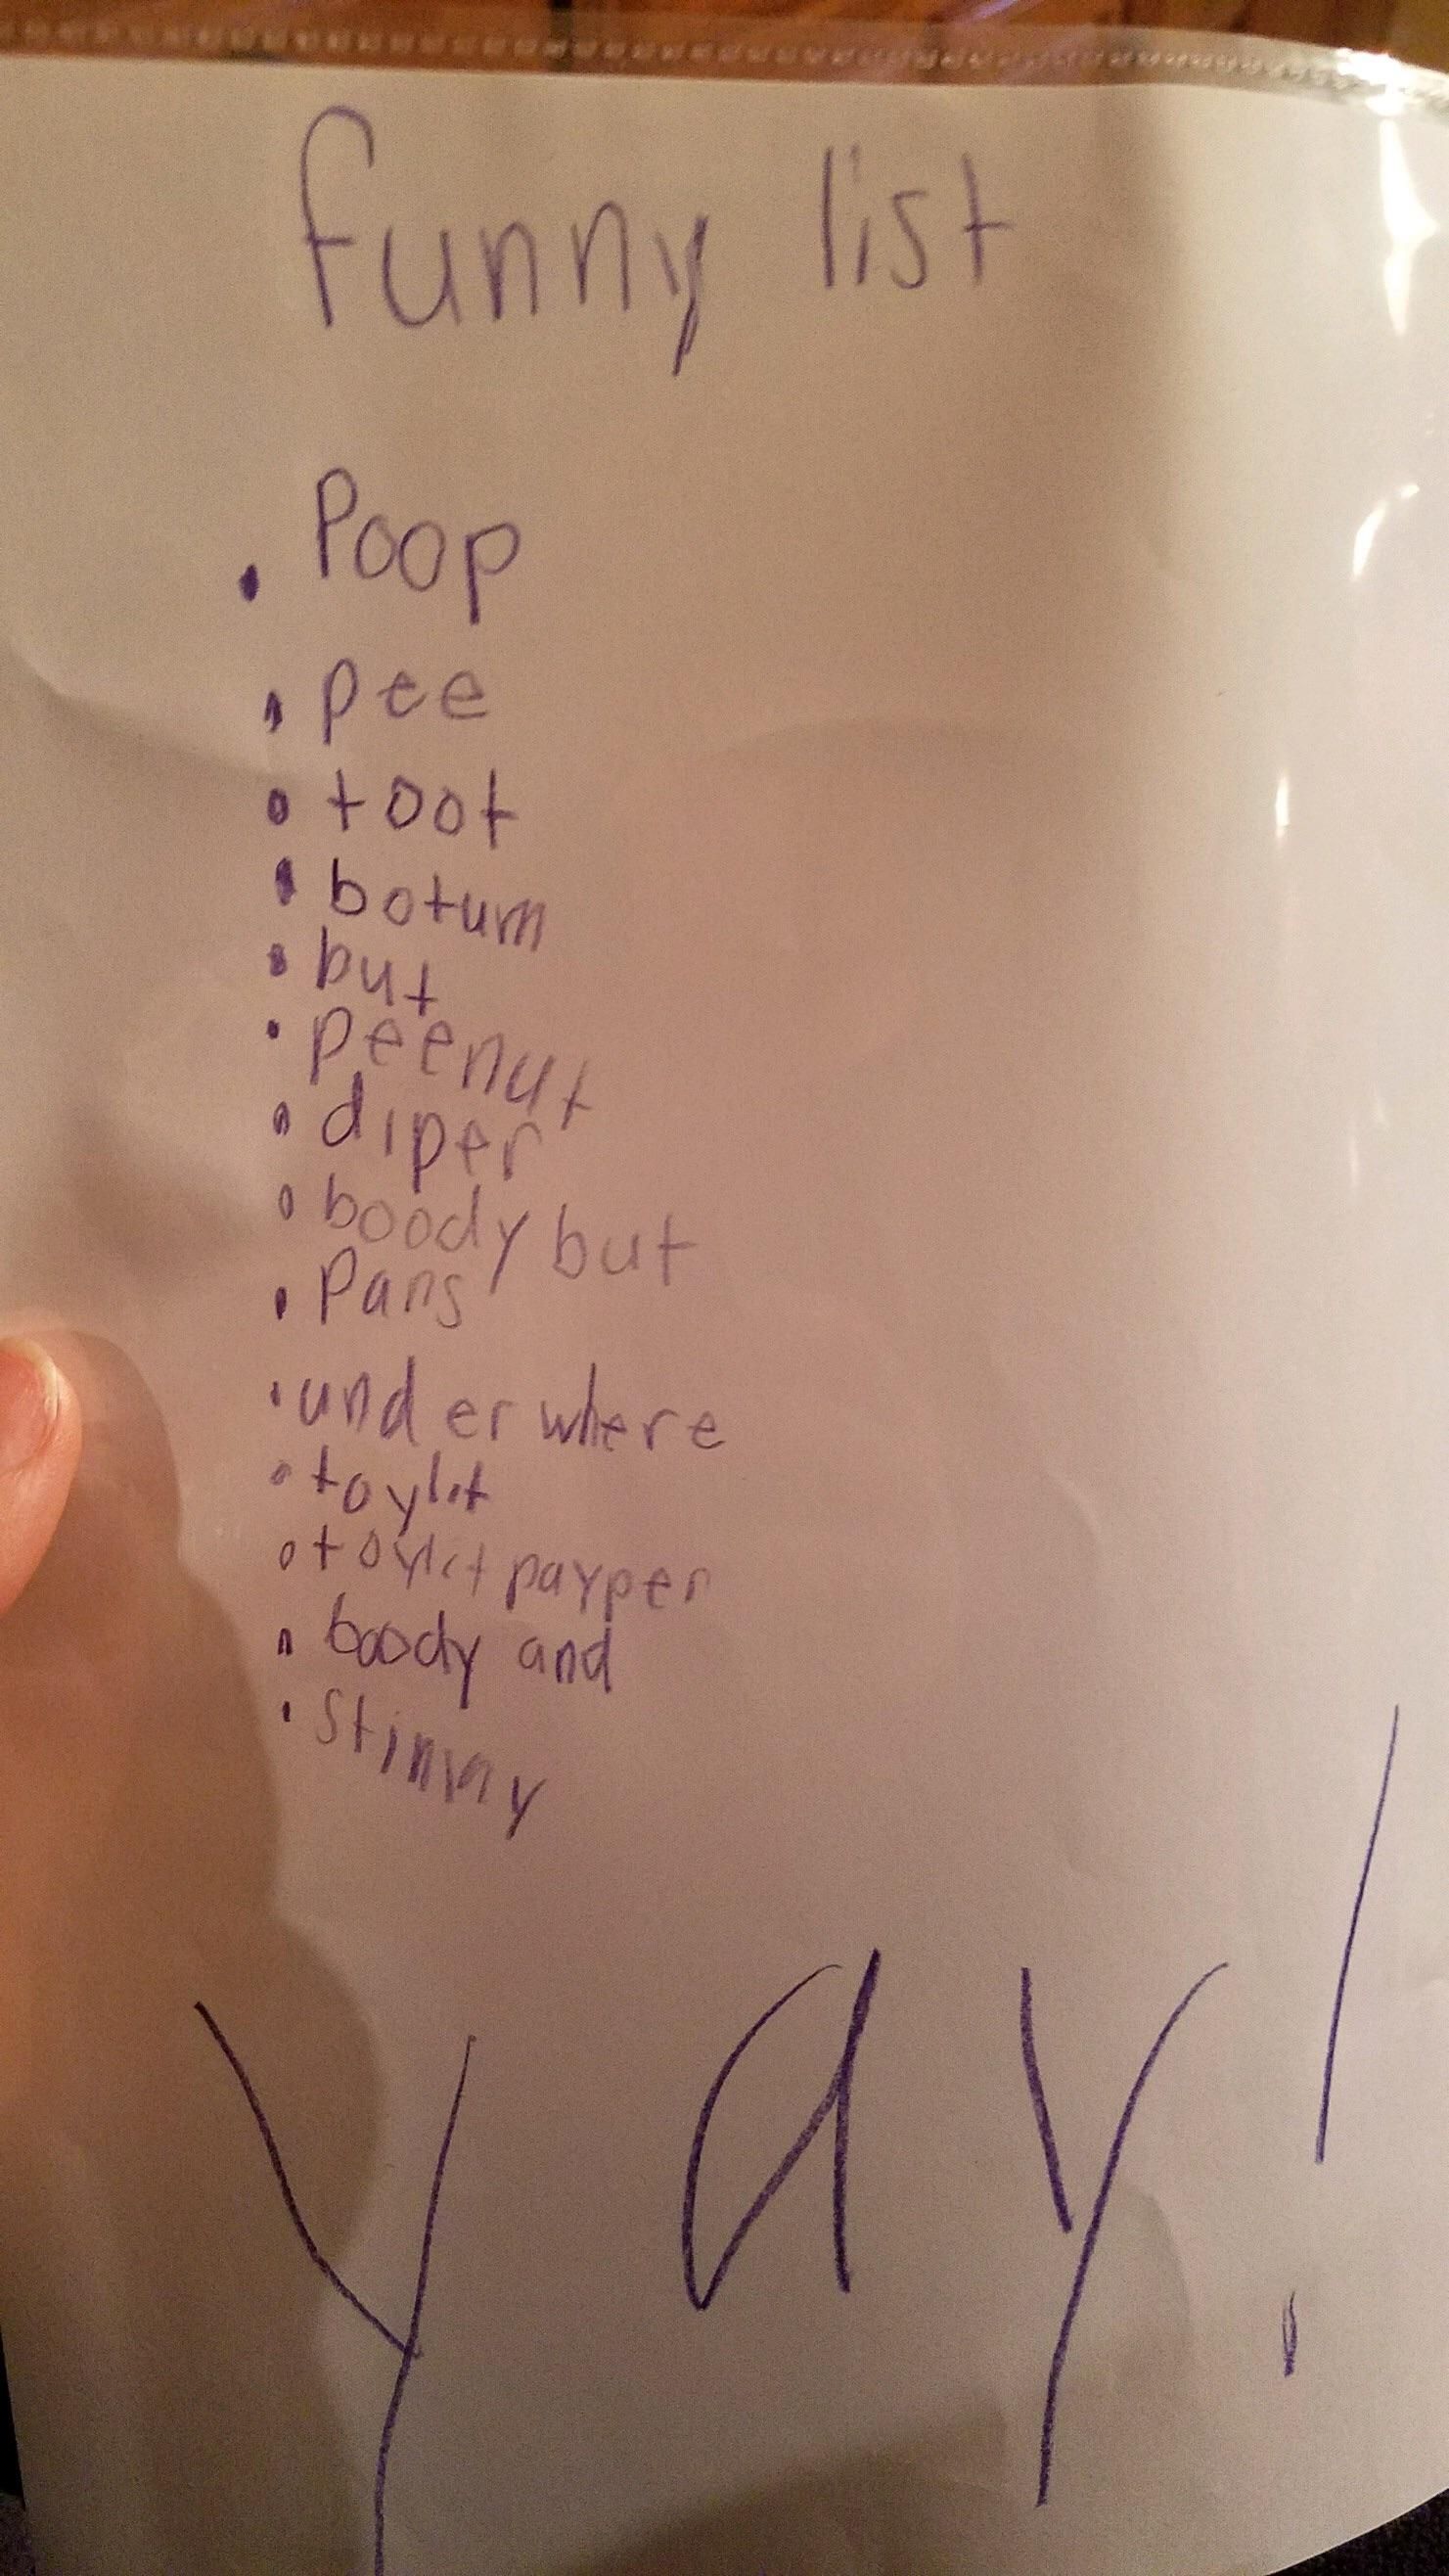 My 6 year old niece made a list of things that are funny. I figured I’d post it here as a reference sheet for the internet.